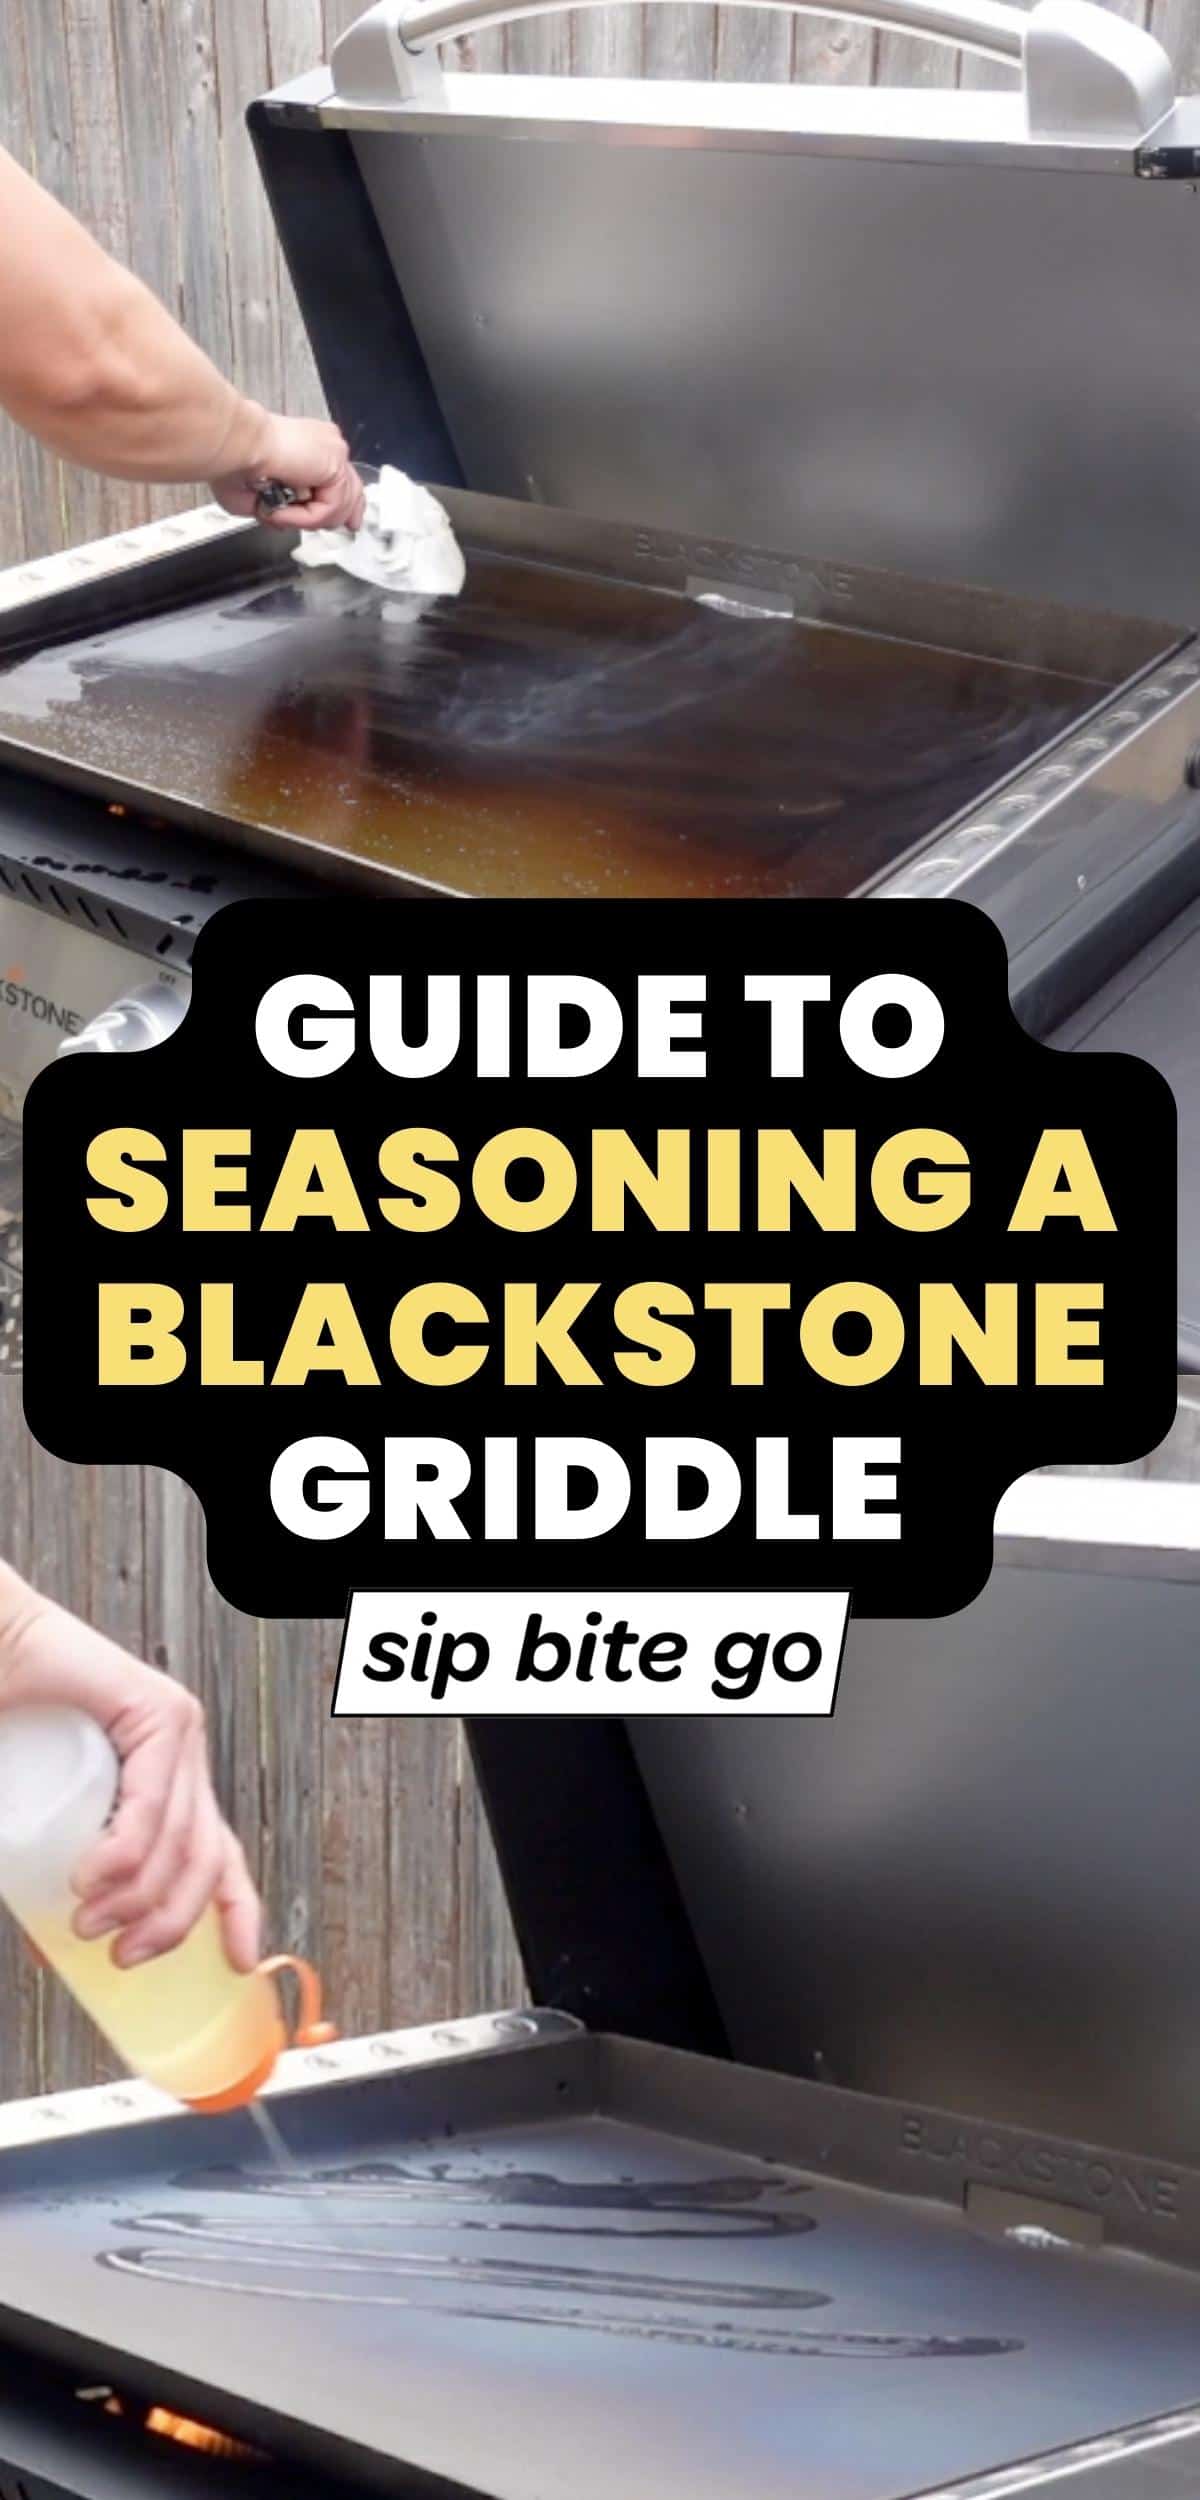 https://sipbitego.com/wp-content/uploads/2023/06/Guide-to-seasoning-a-Blackstone-Griddle-Grill-with-text-overlay-and-images-of-process-with-Sip-Bite-Go-logo.jpeg